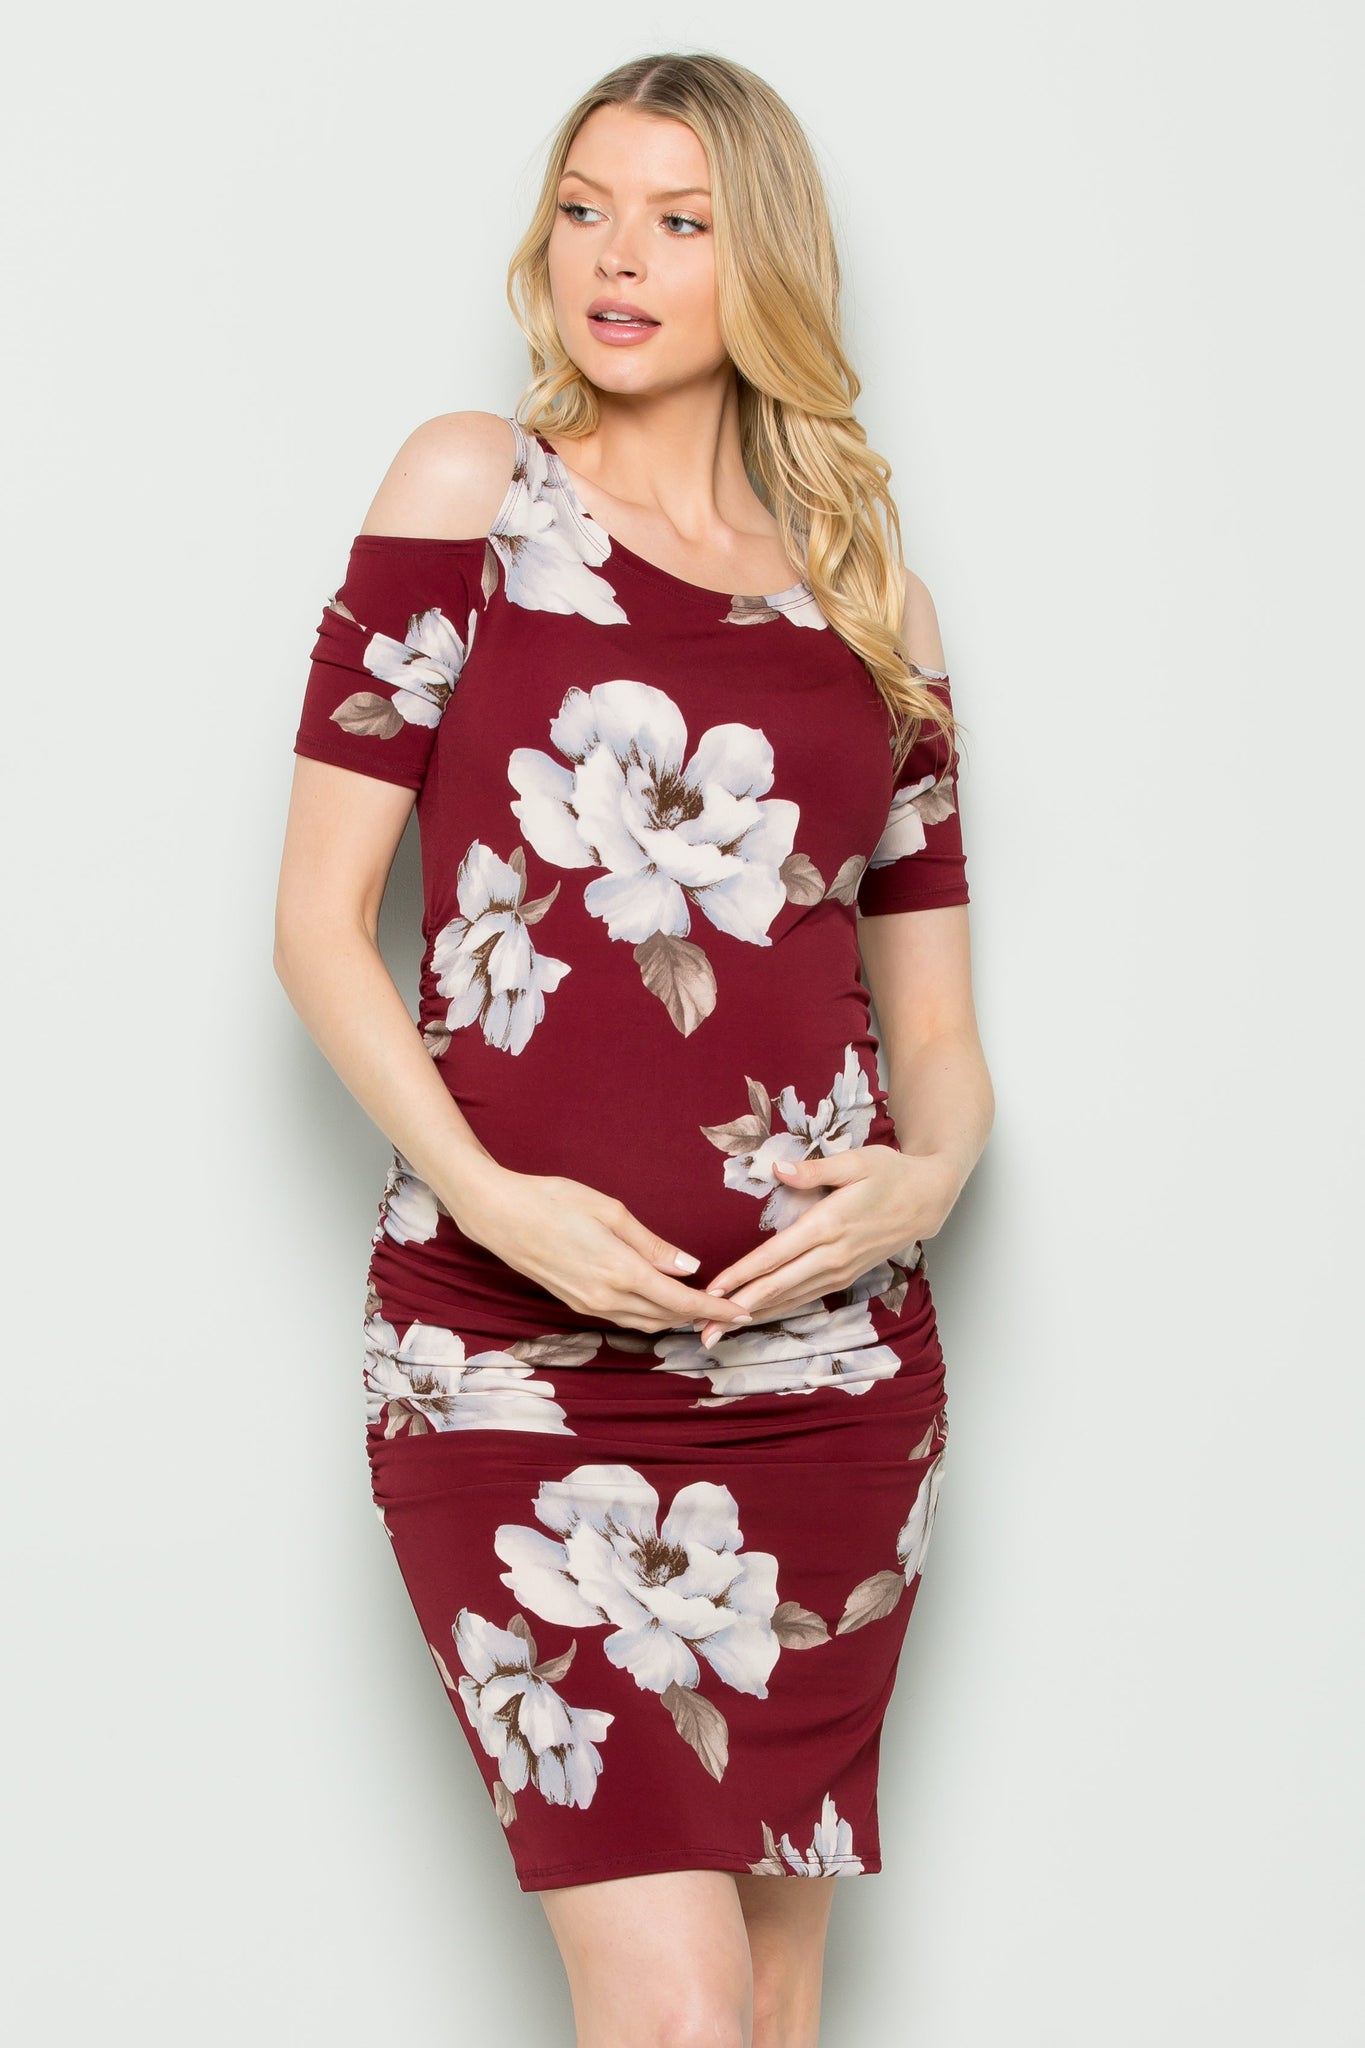 maternity pregnancy baby shower floral cold shoulder short sleeve round scoope neck knee summer cocktail bodycon dress